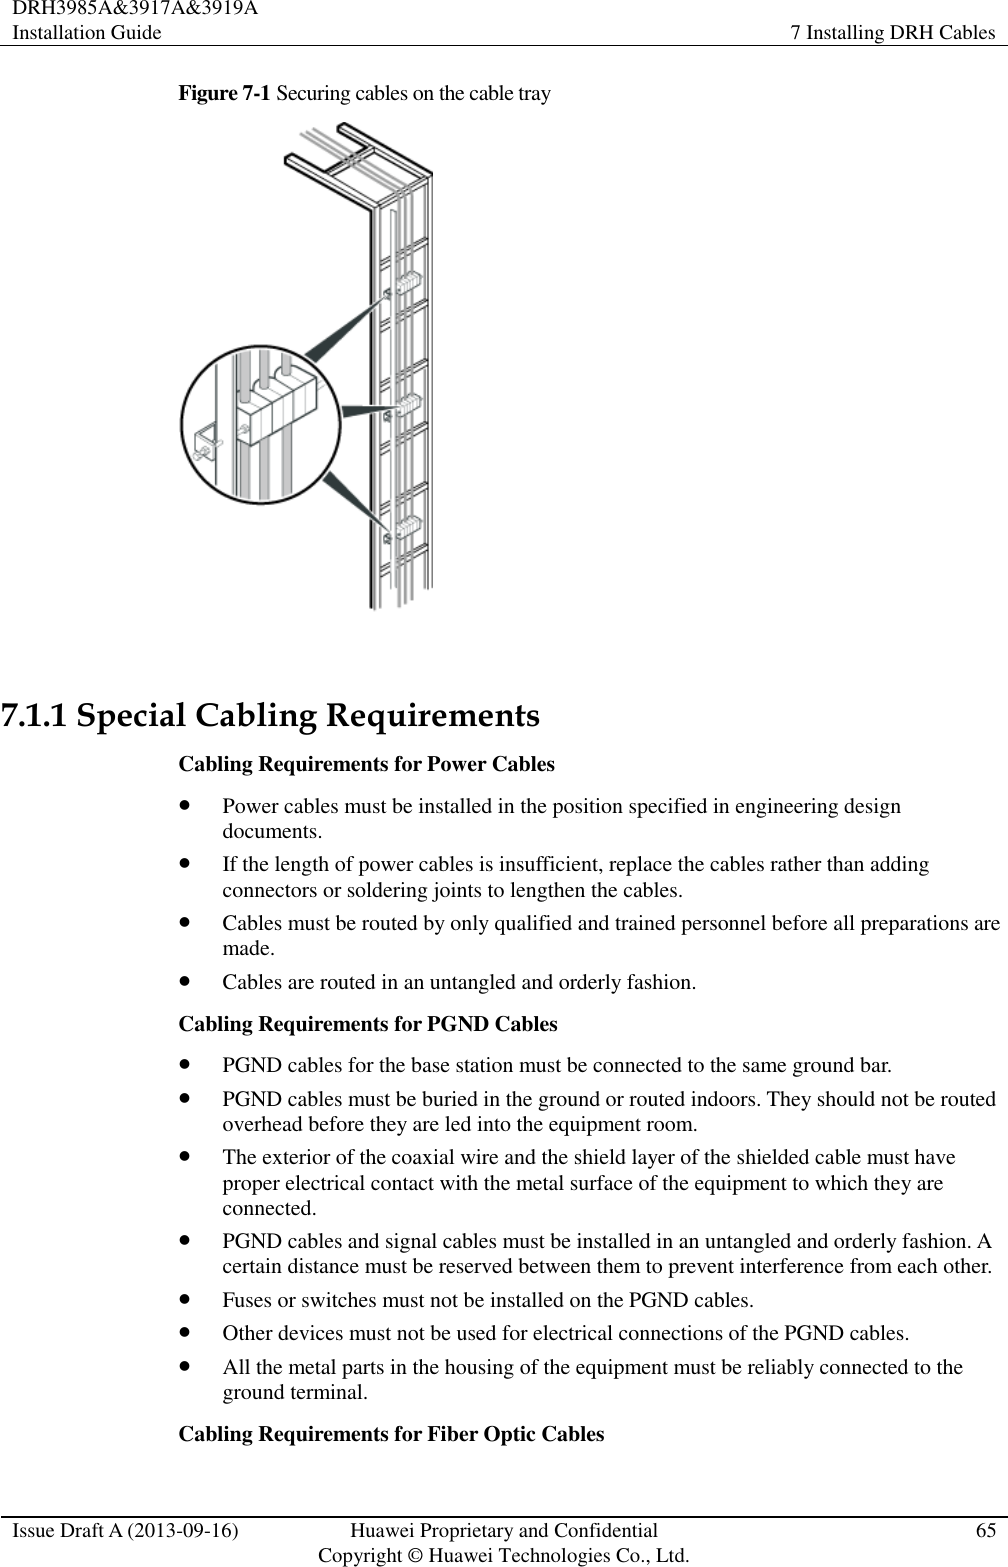 DRH3985A&amp;3917A&amp;3919A Installation Guide 7 Installing DRH Cables  Issue Draft A (2013-09-16) Huawei Proprietary and Confidential                                     Copyright © Huawei Technologies Co., Ltd. 65  Figure 7-1 Securing cables on the cable tray   7.1.1 Special Cabling Requirements Cabling Requirements for Power Cables  Power cables must be installed in the position specified in engineering design documents.  If the length of power cables is insufficient, replace the cables rather than adding connectors or soldering joints to lengthen the cables.  Cables must be routed by only qualified and trained personnel before all preparations are made.  Cables are routed in an untangled and orderly fashion. Cabling Requirements for PGND Cables  PGND cables for the base station must be connected to the same ground bar.  PGND cables must be buried in the ground or routed indoors. They should not be routed overhead before they are led into the equipment room.  The exterior of the coaxial wire and the shield layer of the shielded cable must have proper electrical contact with the metal surface of the equipment to which they are connected.  PGND cables and signal cables must be installed in an untangled and orderly fashion. A certain distance must be reserved between them to prevent interference from each other.  Fuses or switches must not be installed on the PGND cables.  Other devices must not be used for electrical connections of the PGND cables.  All the metal parts in the housing of the equipment must be reliably connected to the ground terminal. Cabling Requirements for Fiber Optic Cables 